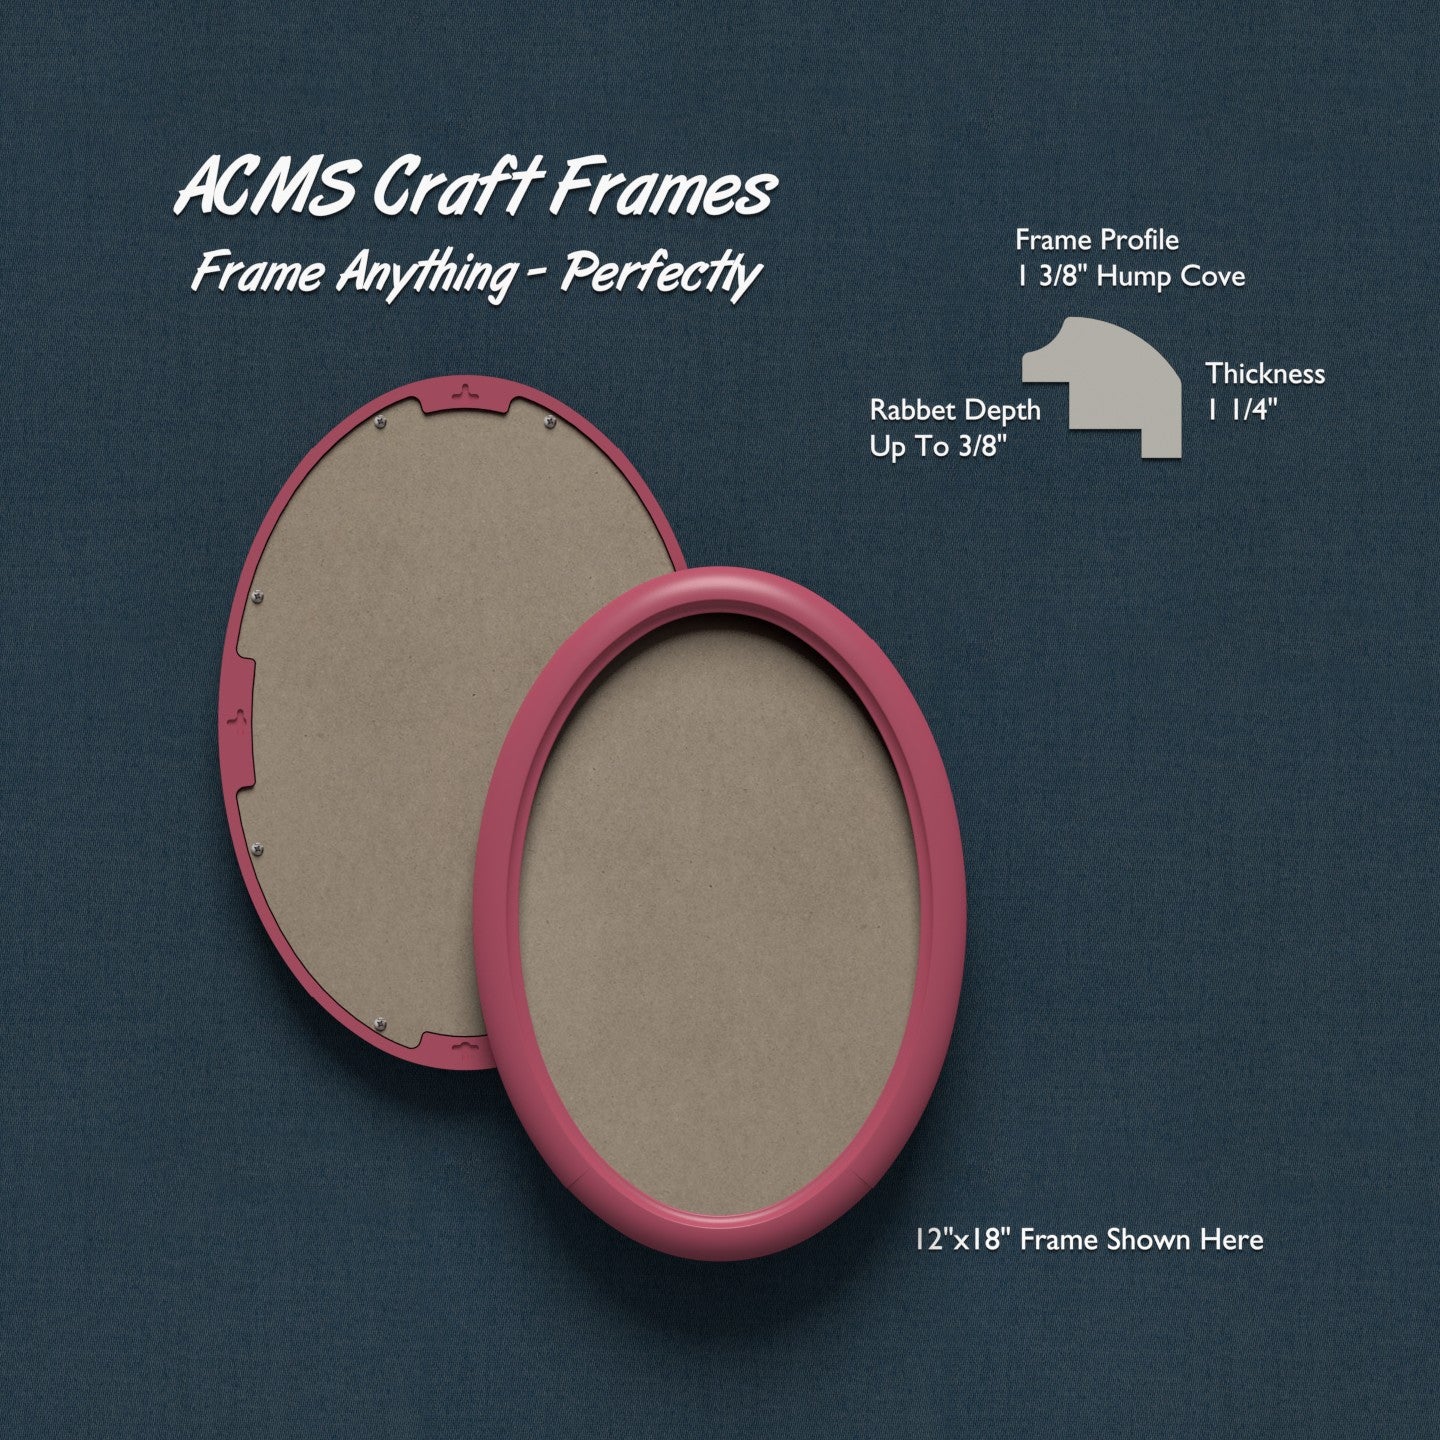 Oval Craft Frame - 1 1/4" Thick - 1 3/8" HUMP COVE Profile